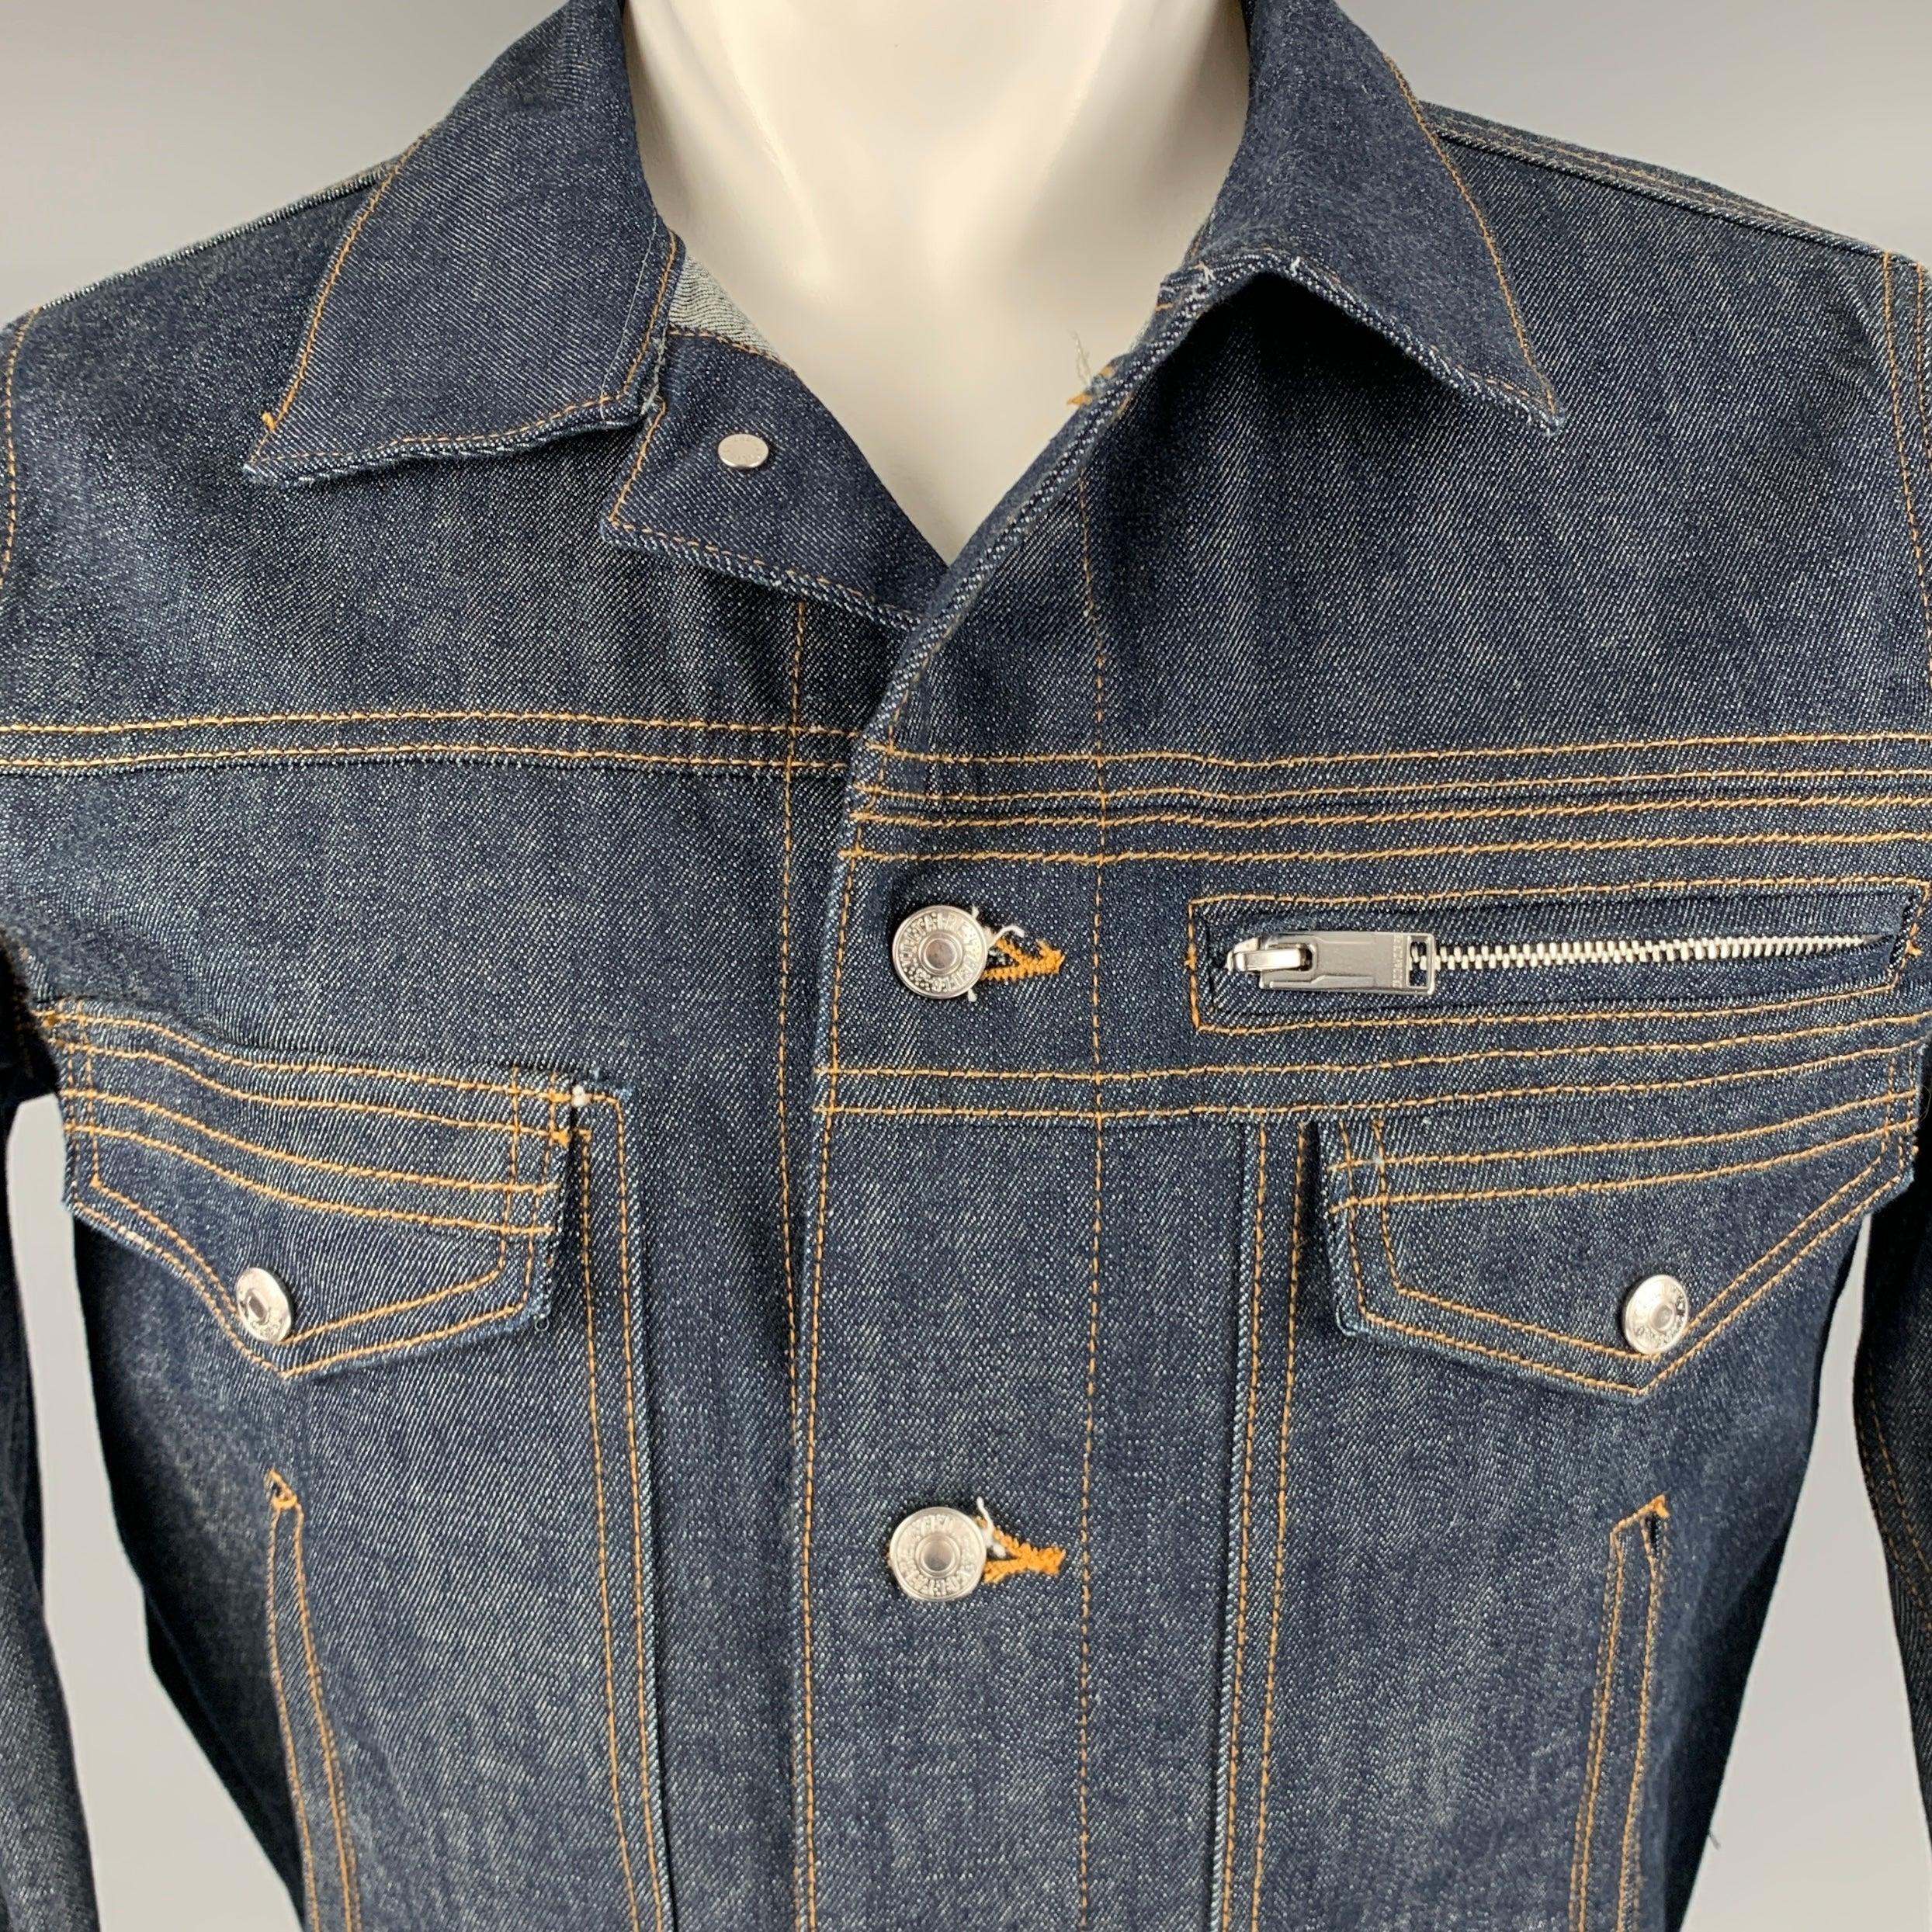 ZADIG & VOLTAIRE jacket
in an indigo cotton blend denim featuring a trucker style, yellow contrast stitching, five utilitarian pockets, and button closure.Excellent Pre-Owned Condition. 

Marked:   S 

Measurements: 
 
Shoulder: 16.5 inches Chest: